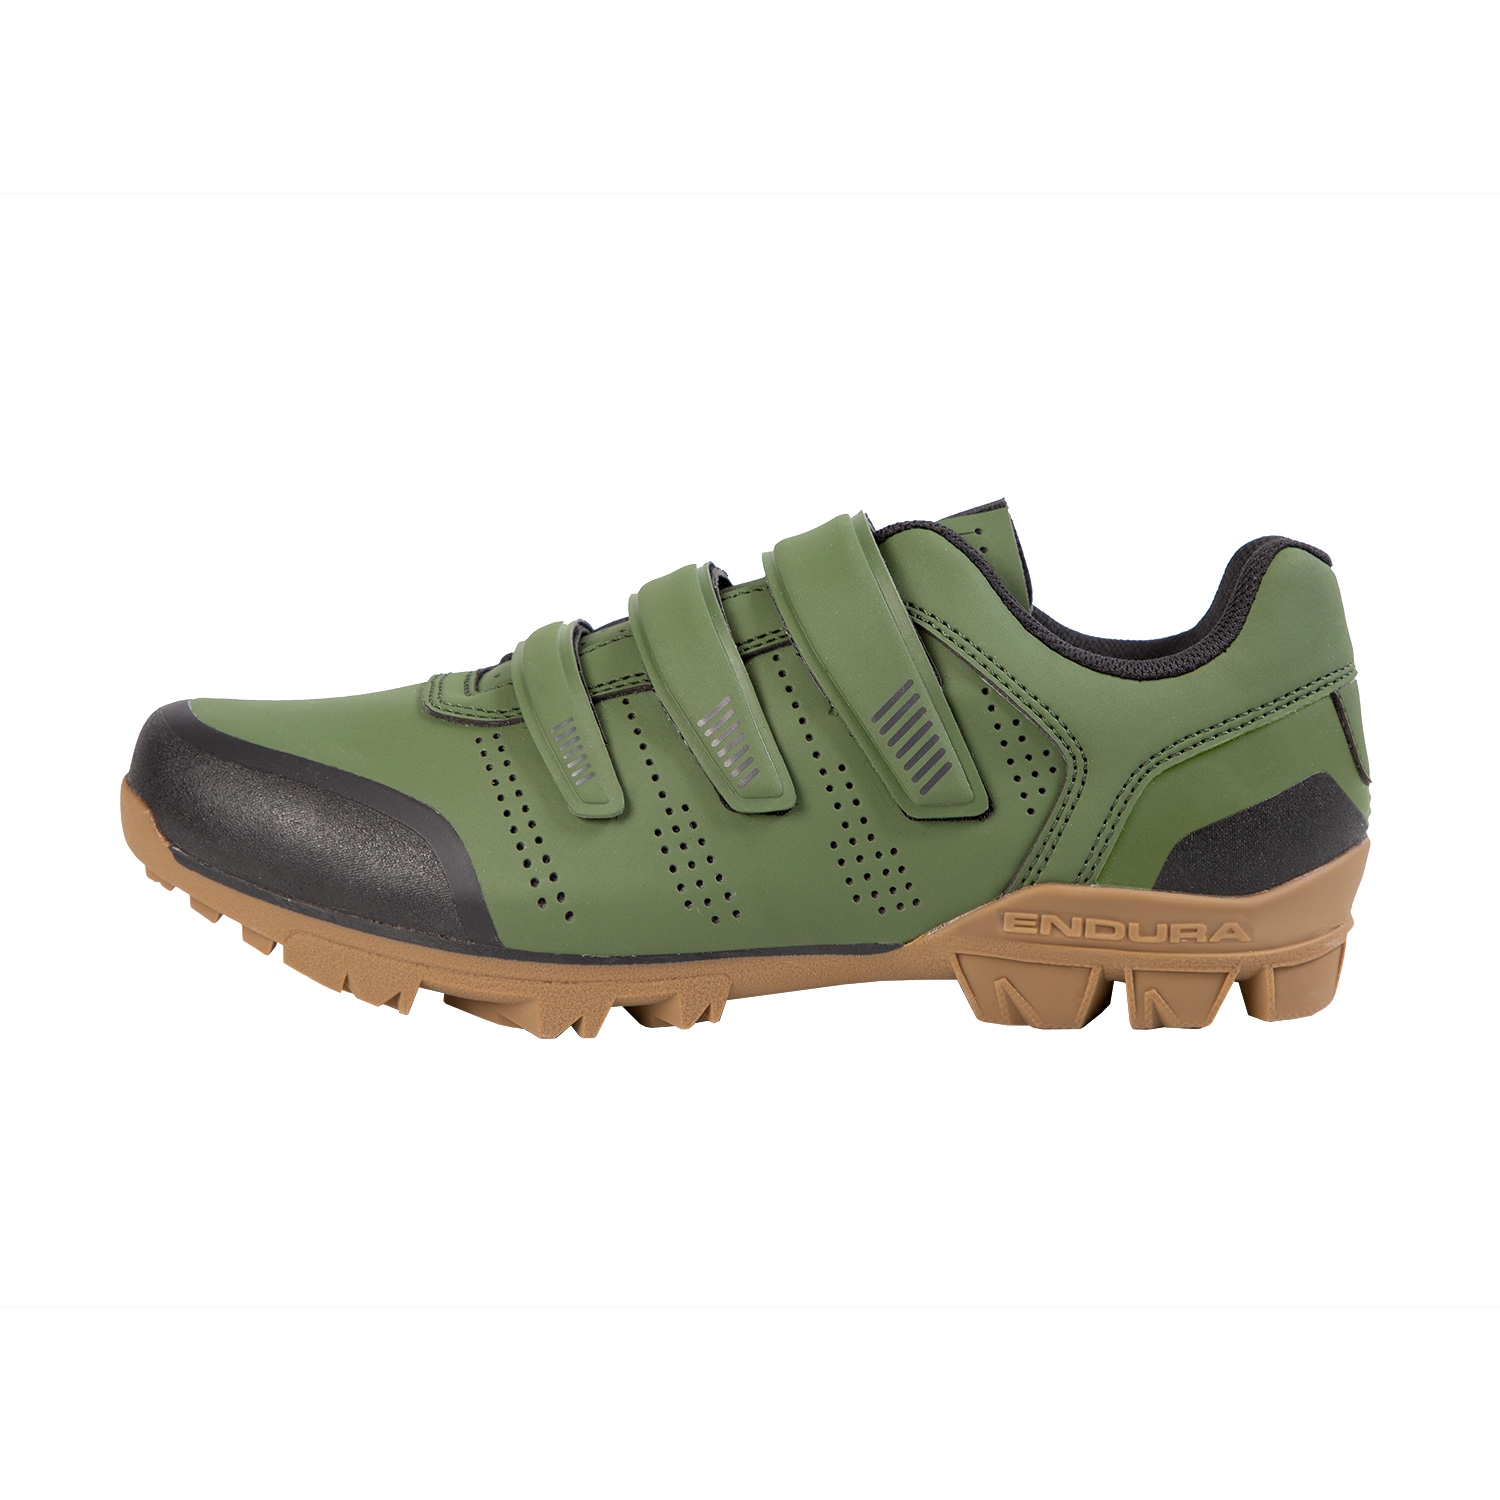 Picture of Endura Hummvee XC Shoes - olive green